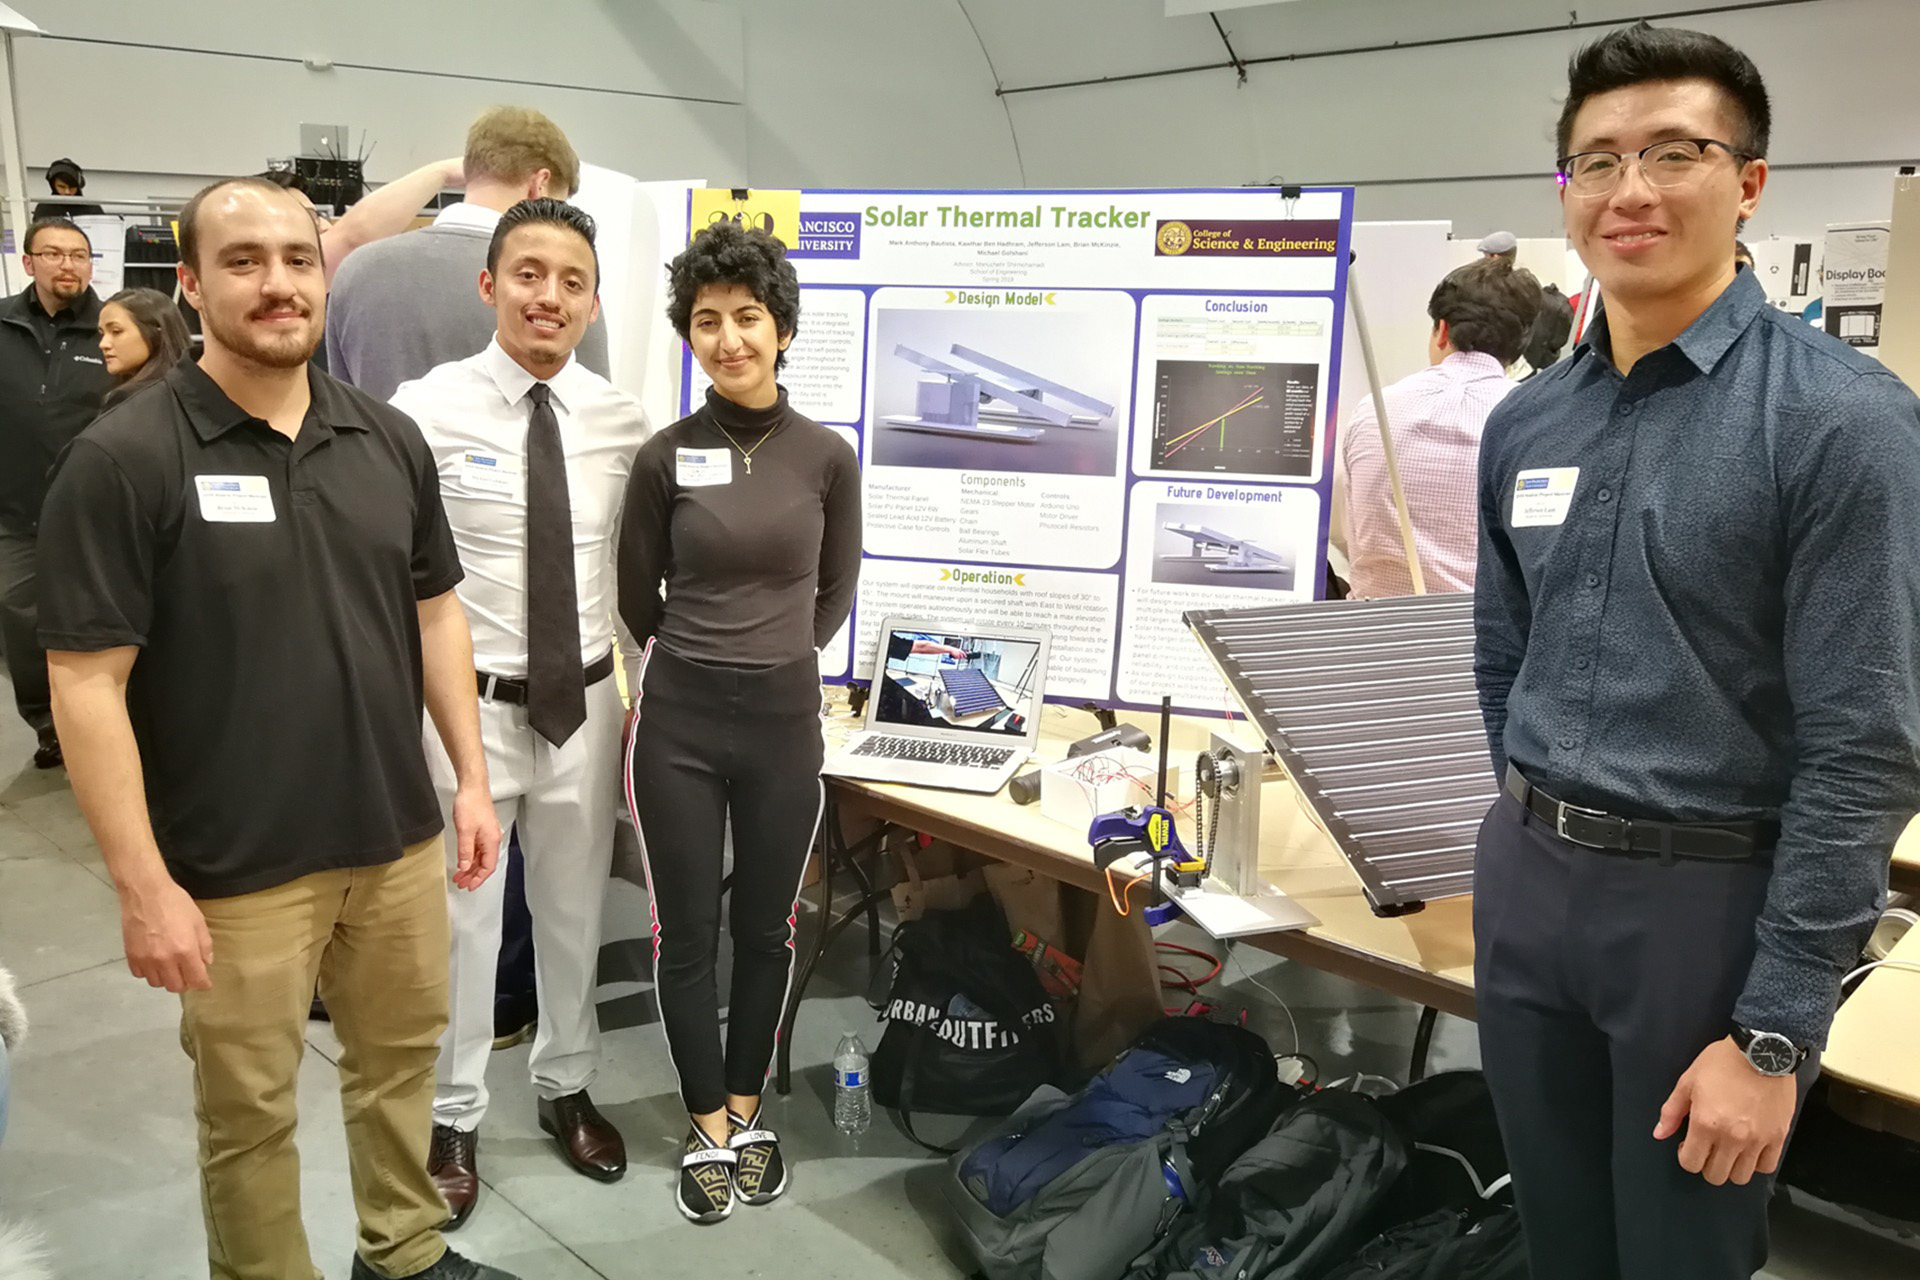 engineering students in front of a science fair display